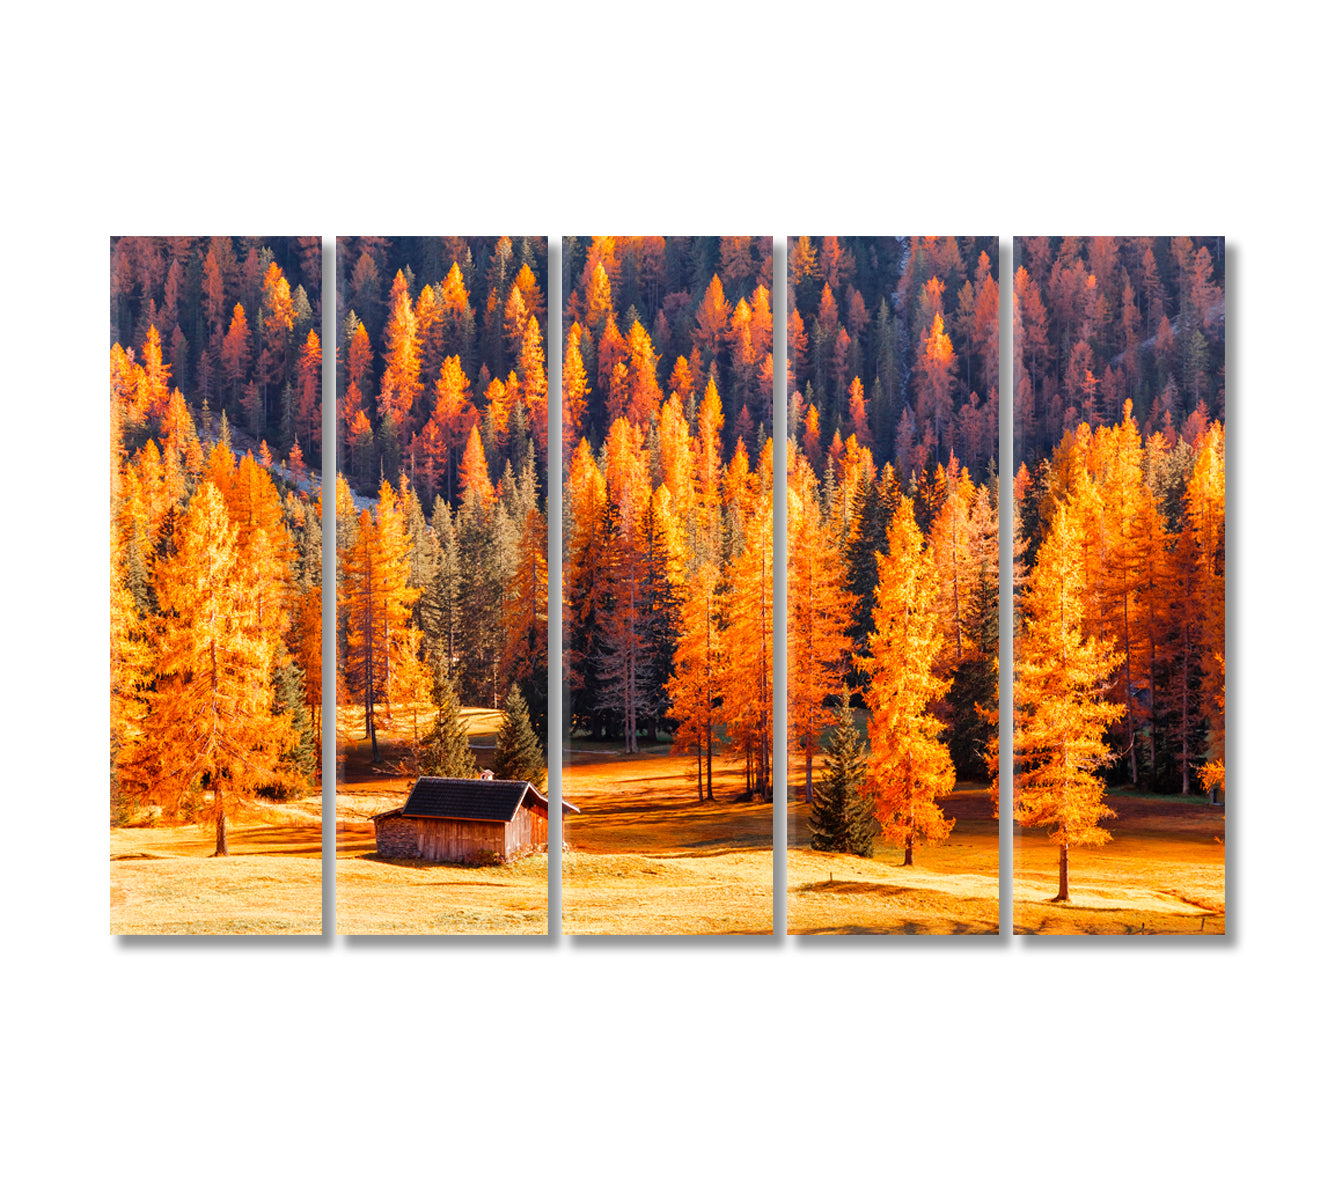 Wooden House Surrounded by Autumn Dolomites Trees Canvas Print-Canvas Print-CetArt-5 Panels-36x24 inches-CetArt